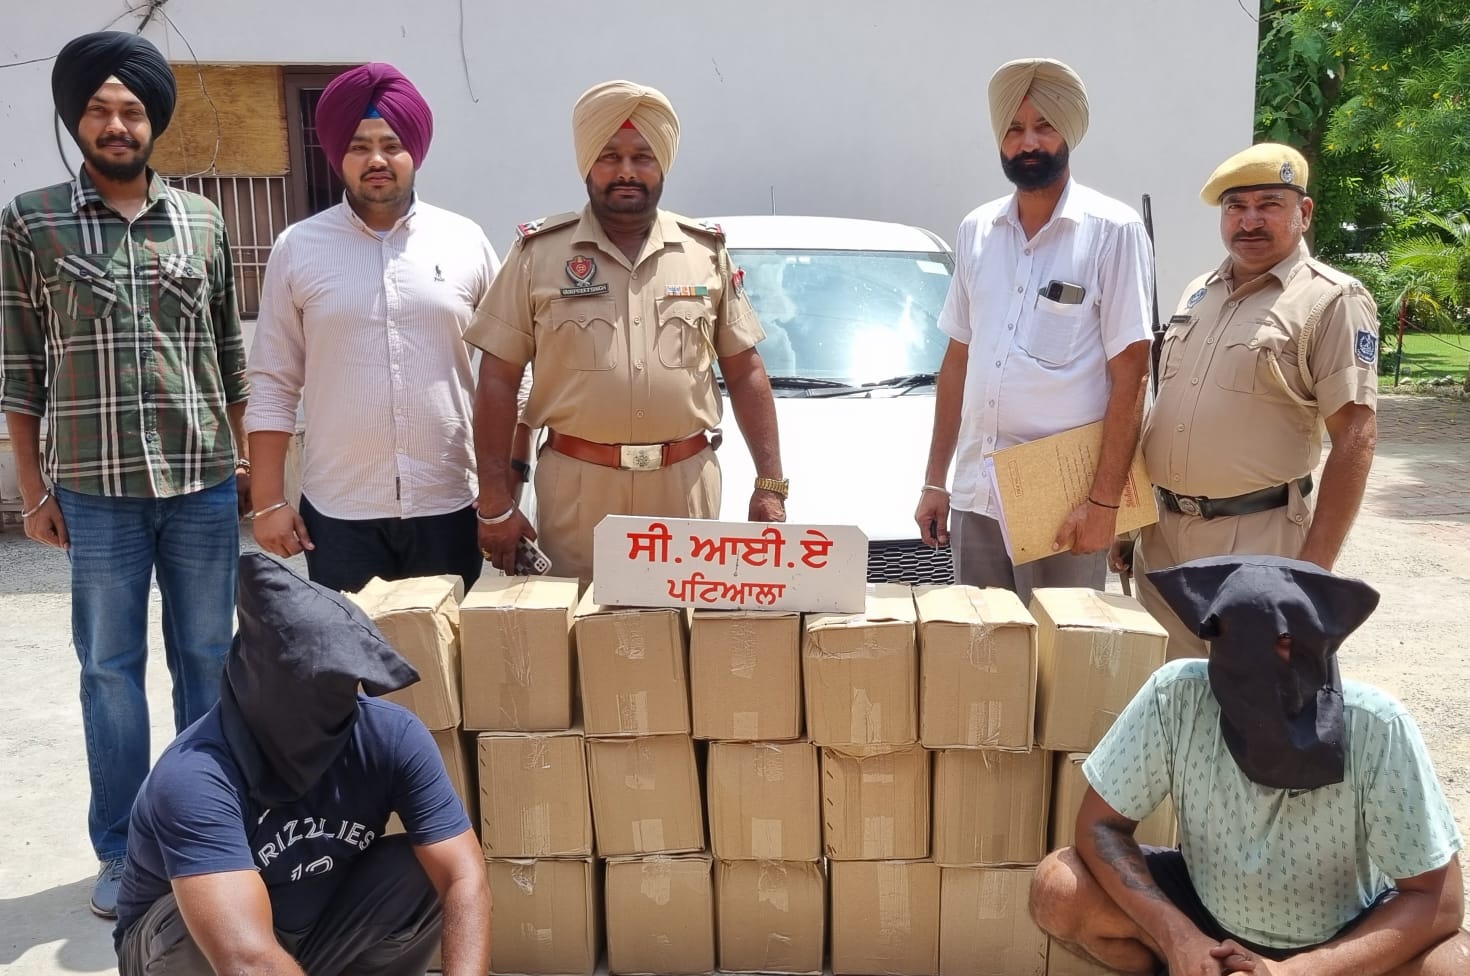 Patiala police arrested 2 liquor smugglers with 40 boxes